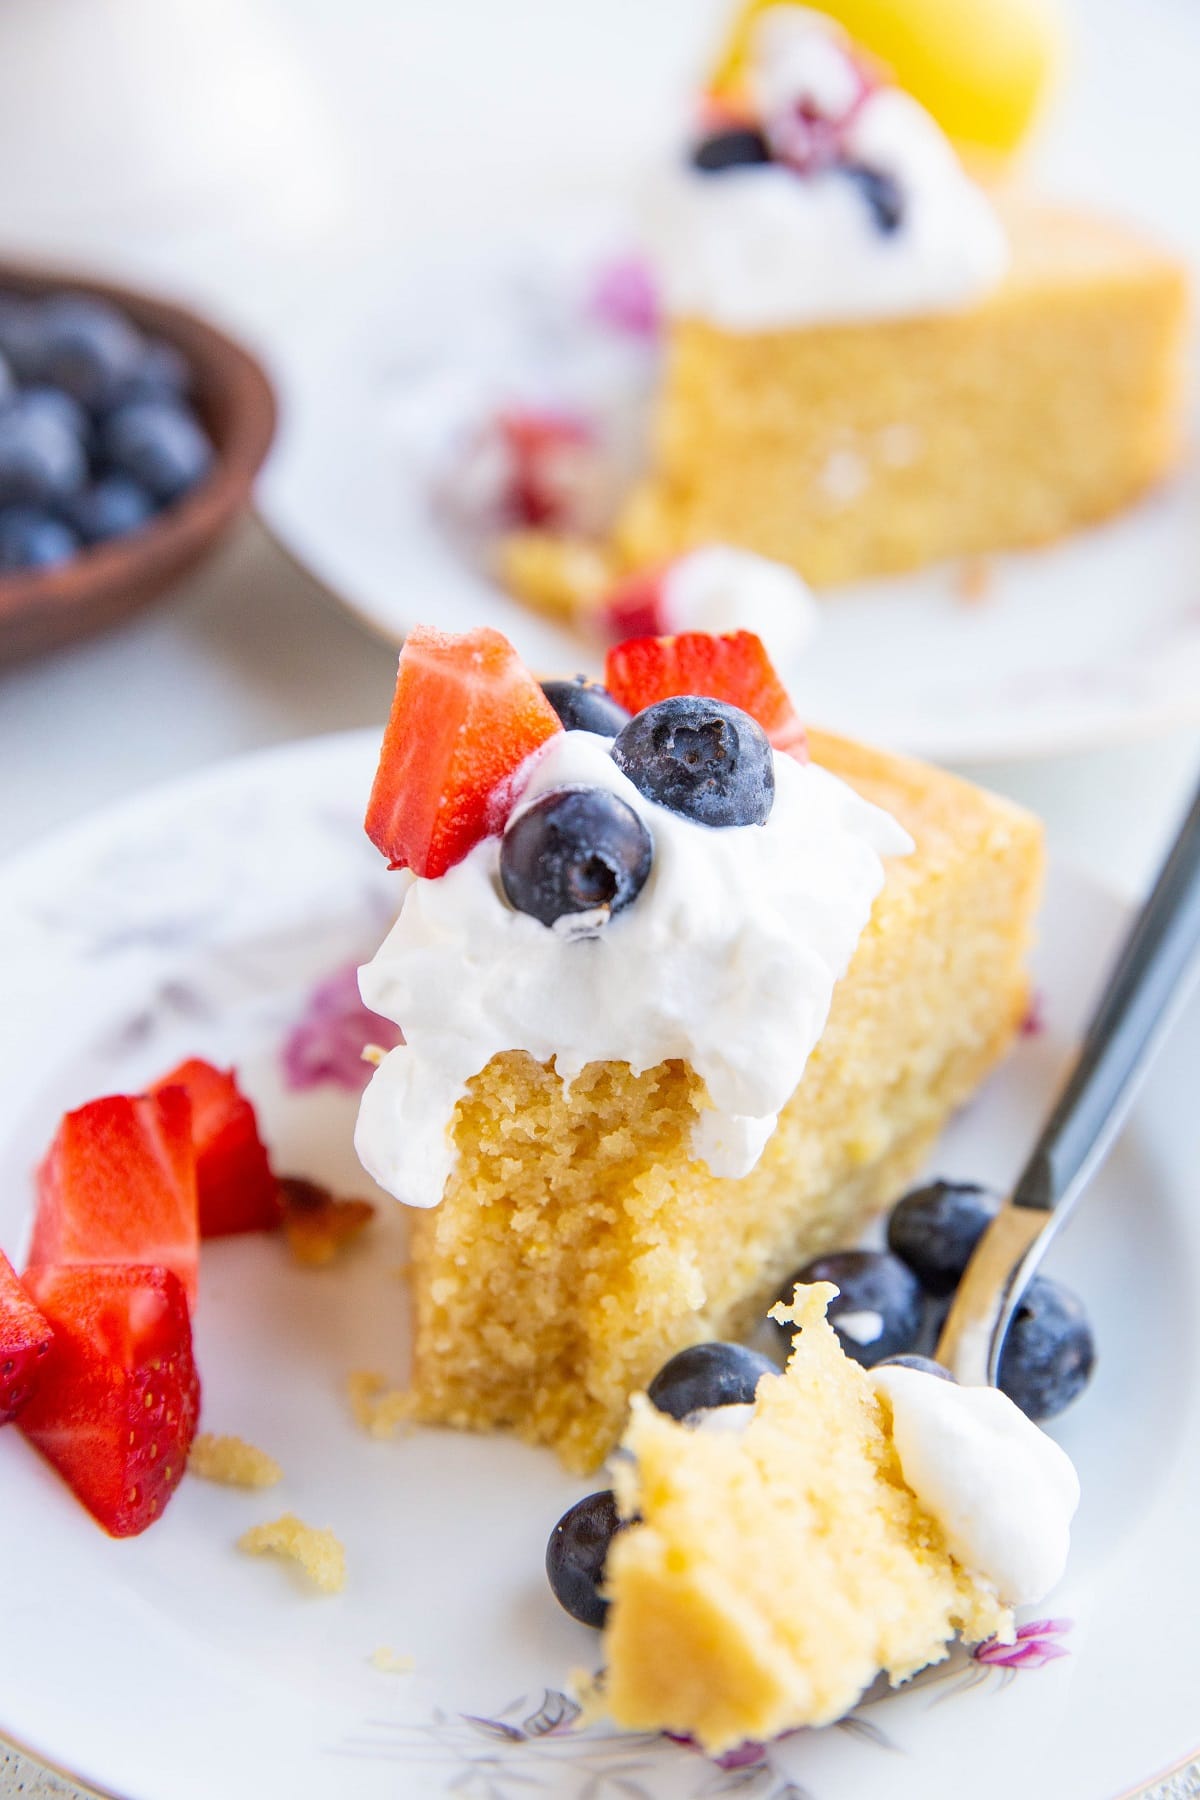 Slice of Almond flour lemon cake with whipped cream and berries on top with a bite taken out.